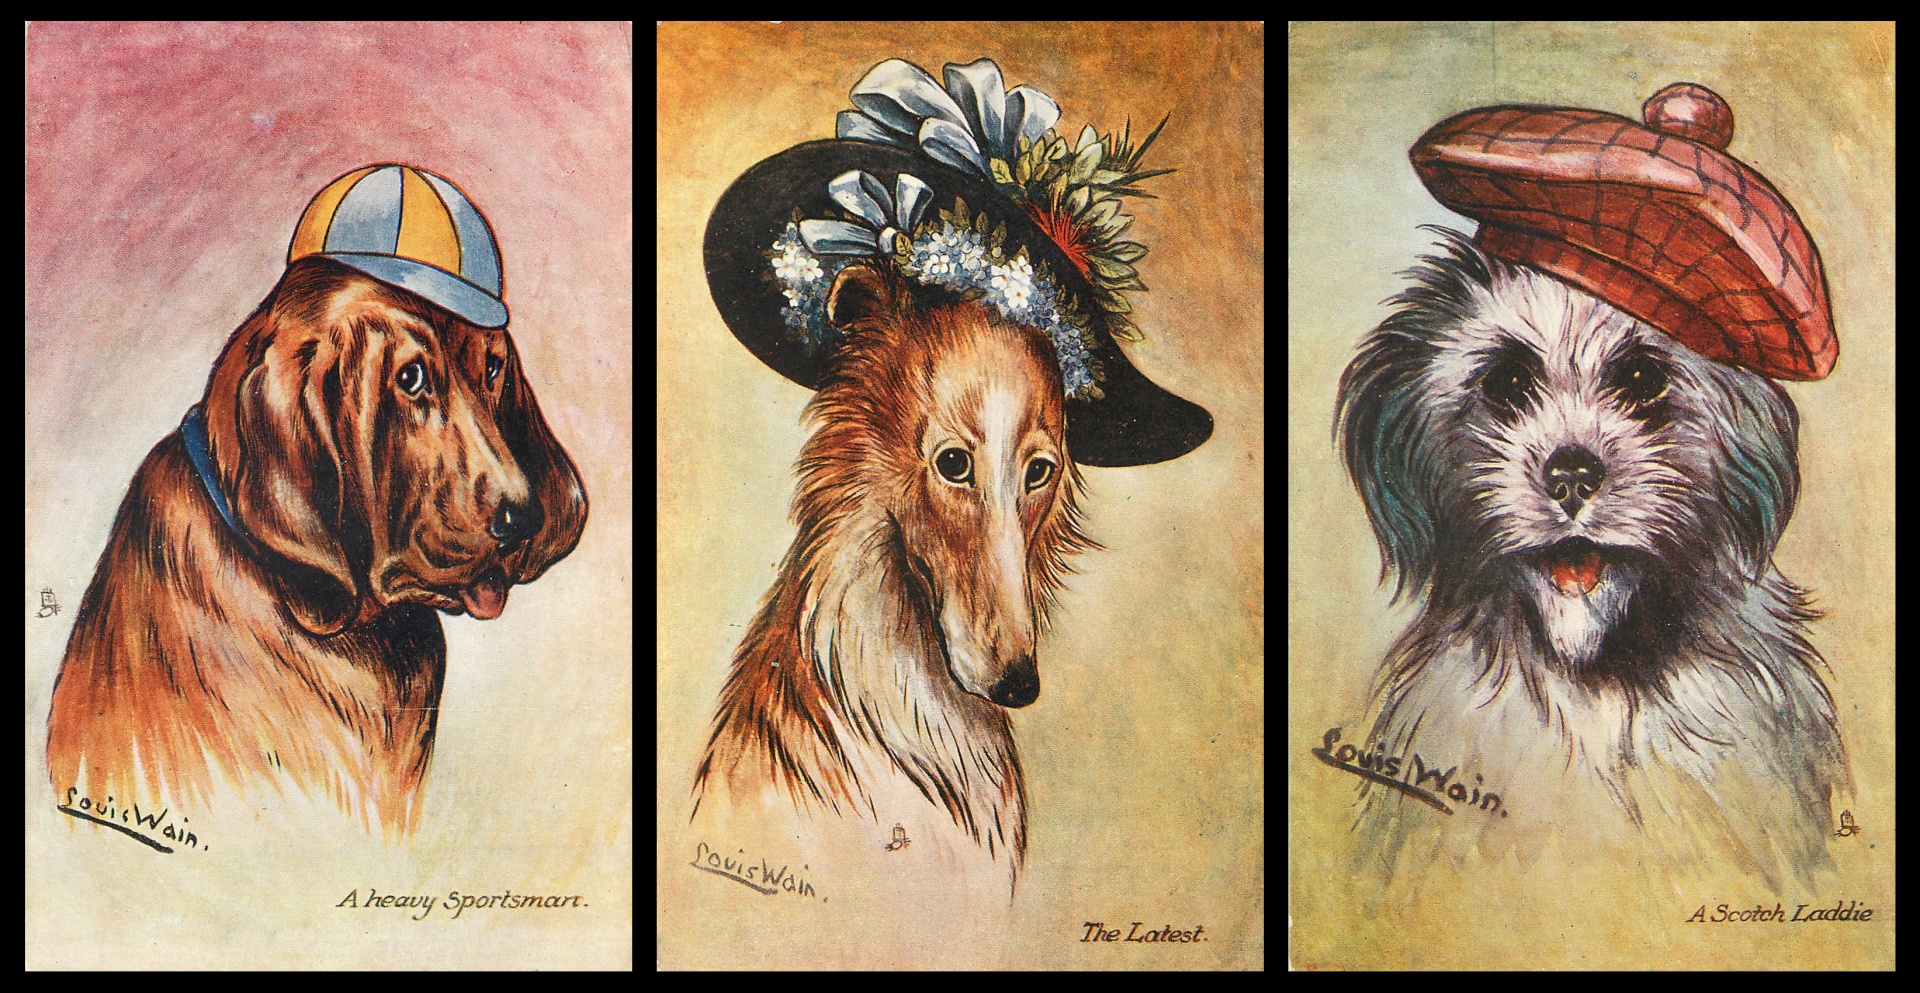 Re-worked triptych poster, print of three cartoon dogs by artist louis wain, bloodhound, cairn terrier and collie all wearing hats